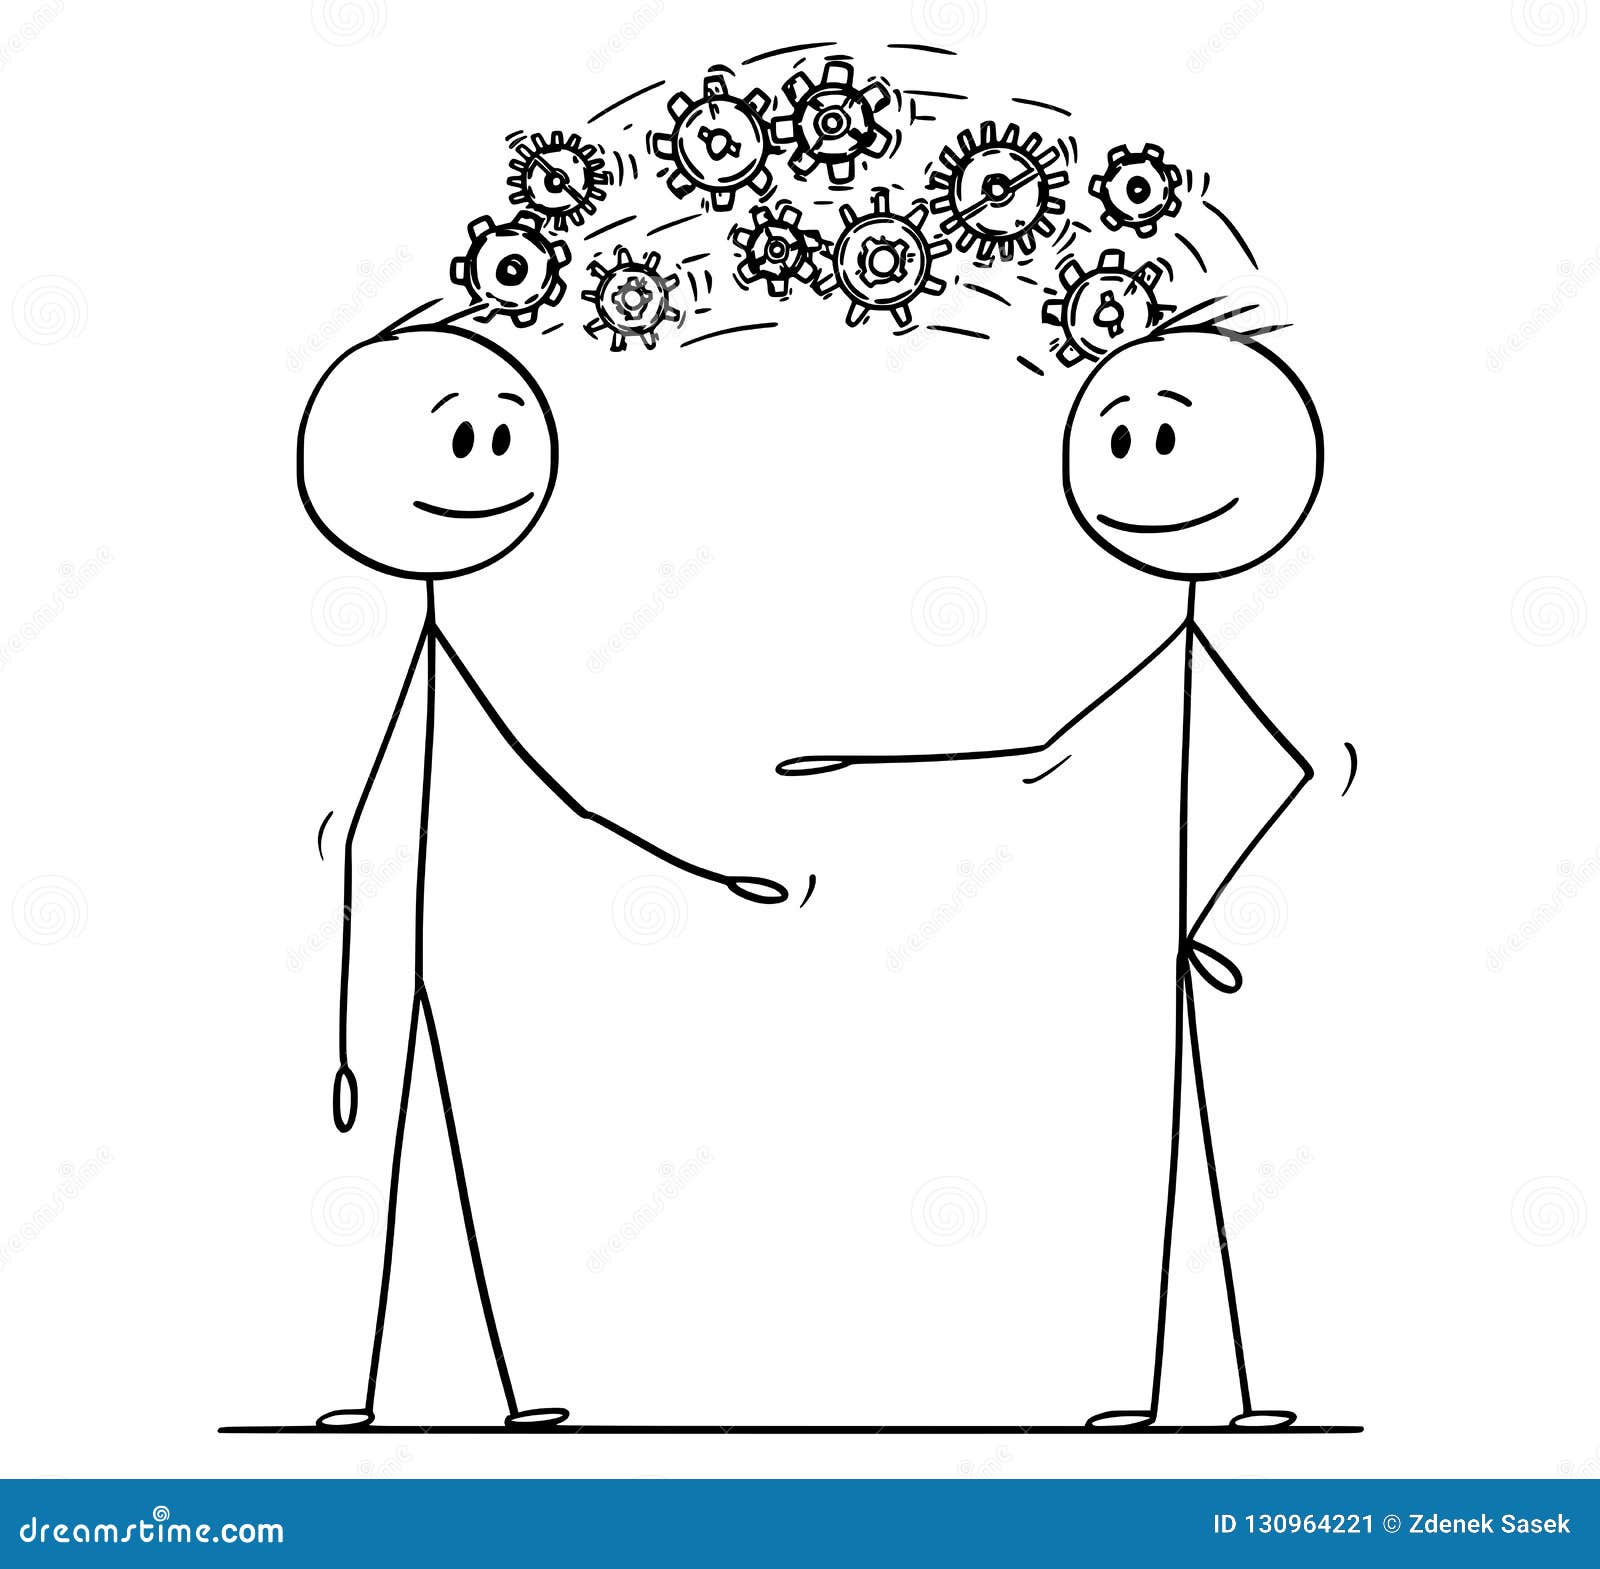 cartoon of two men or businessmen sharing knowledge displayed as cog wheels coming from head